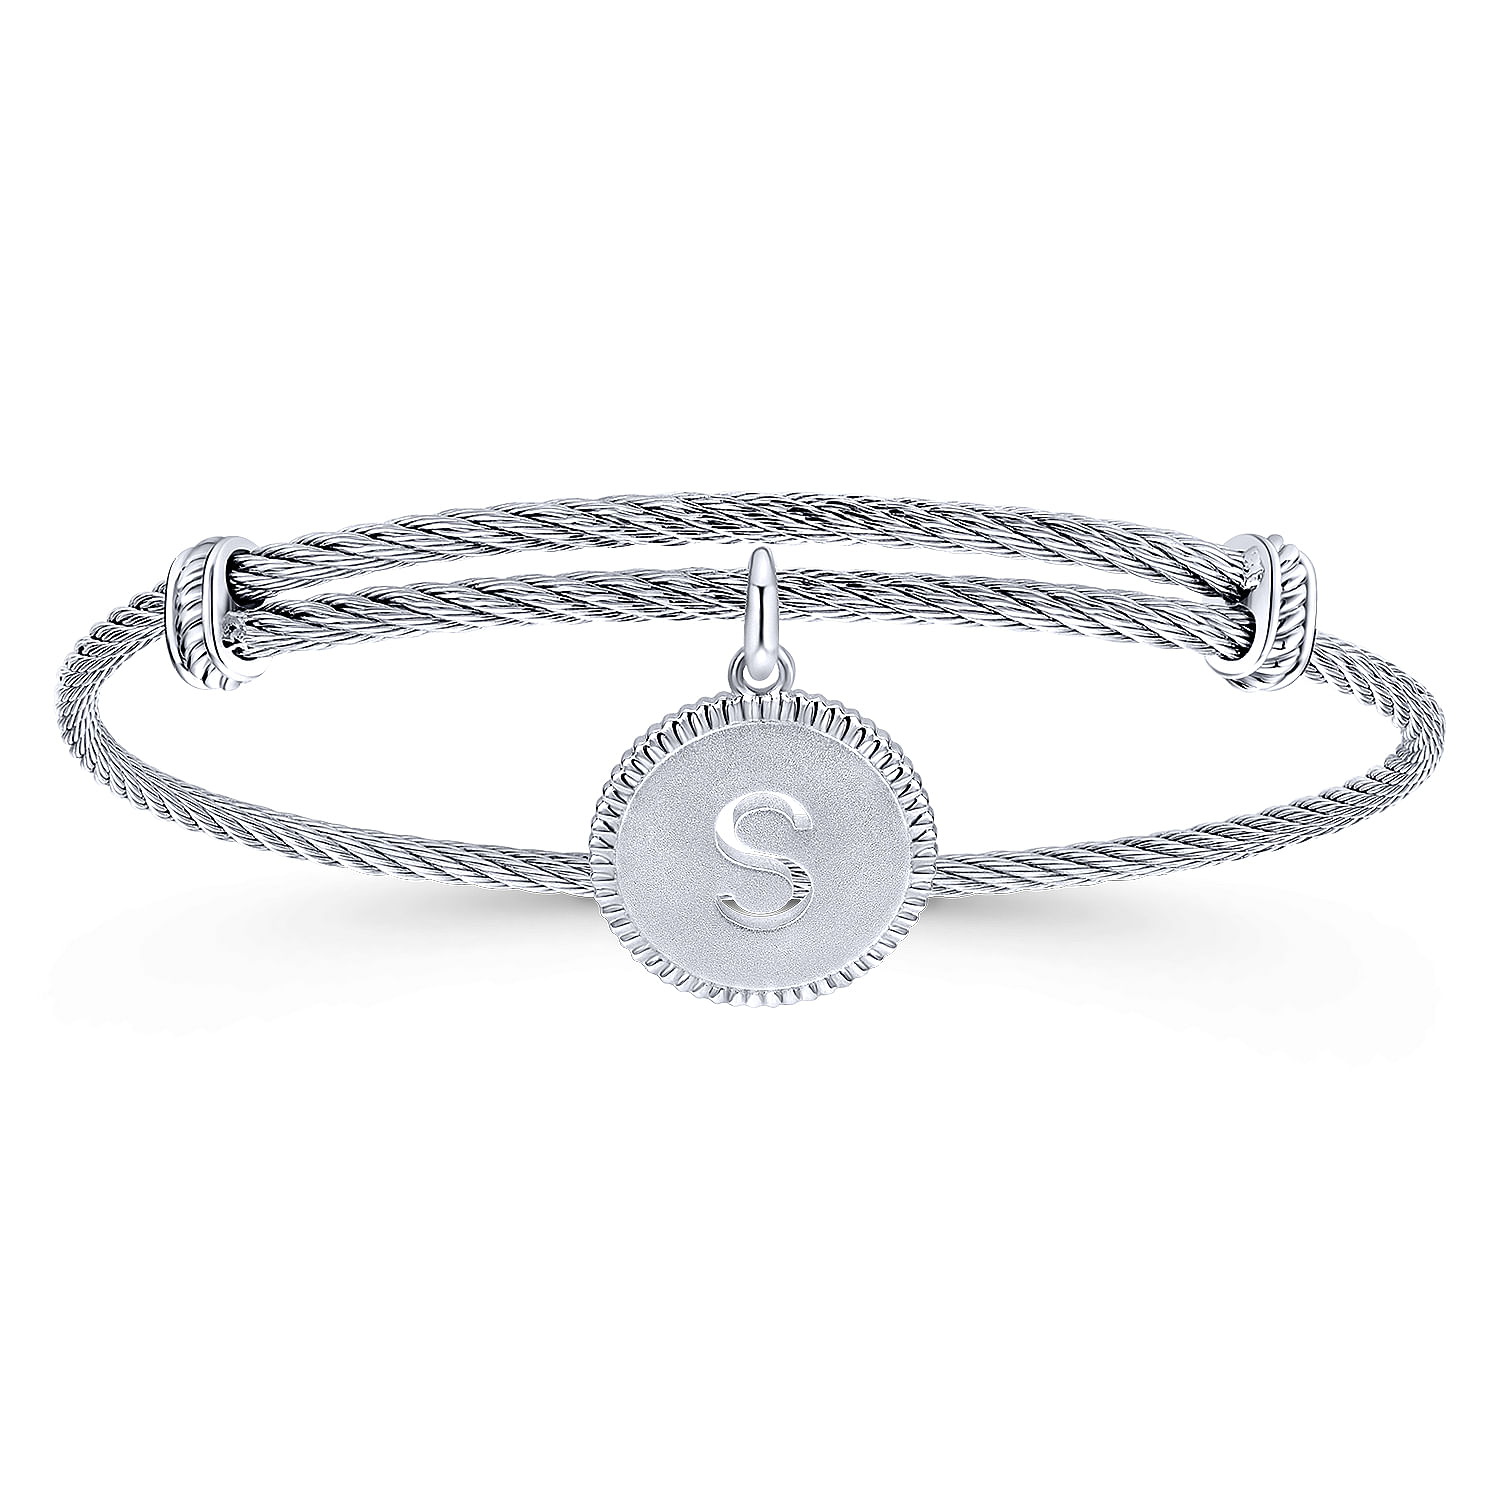 Adjustable Twisted Cable Stainless Steel Bangle with Sterling Silver S Initial Charm